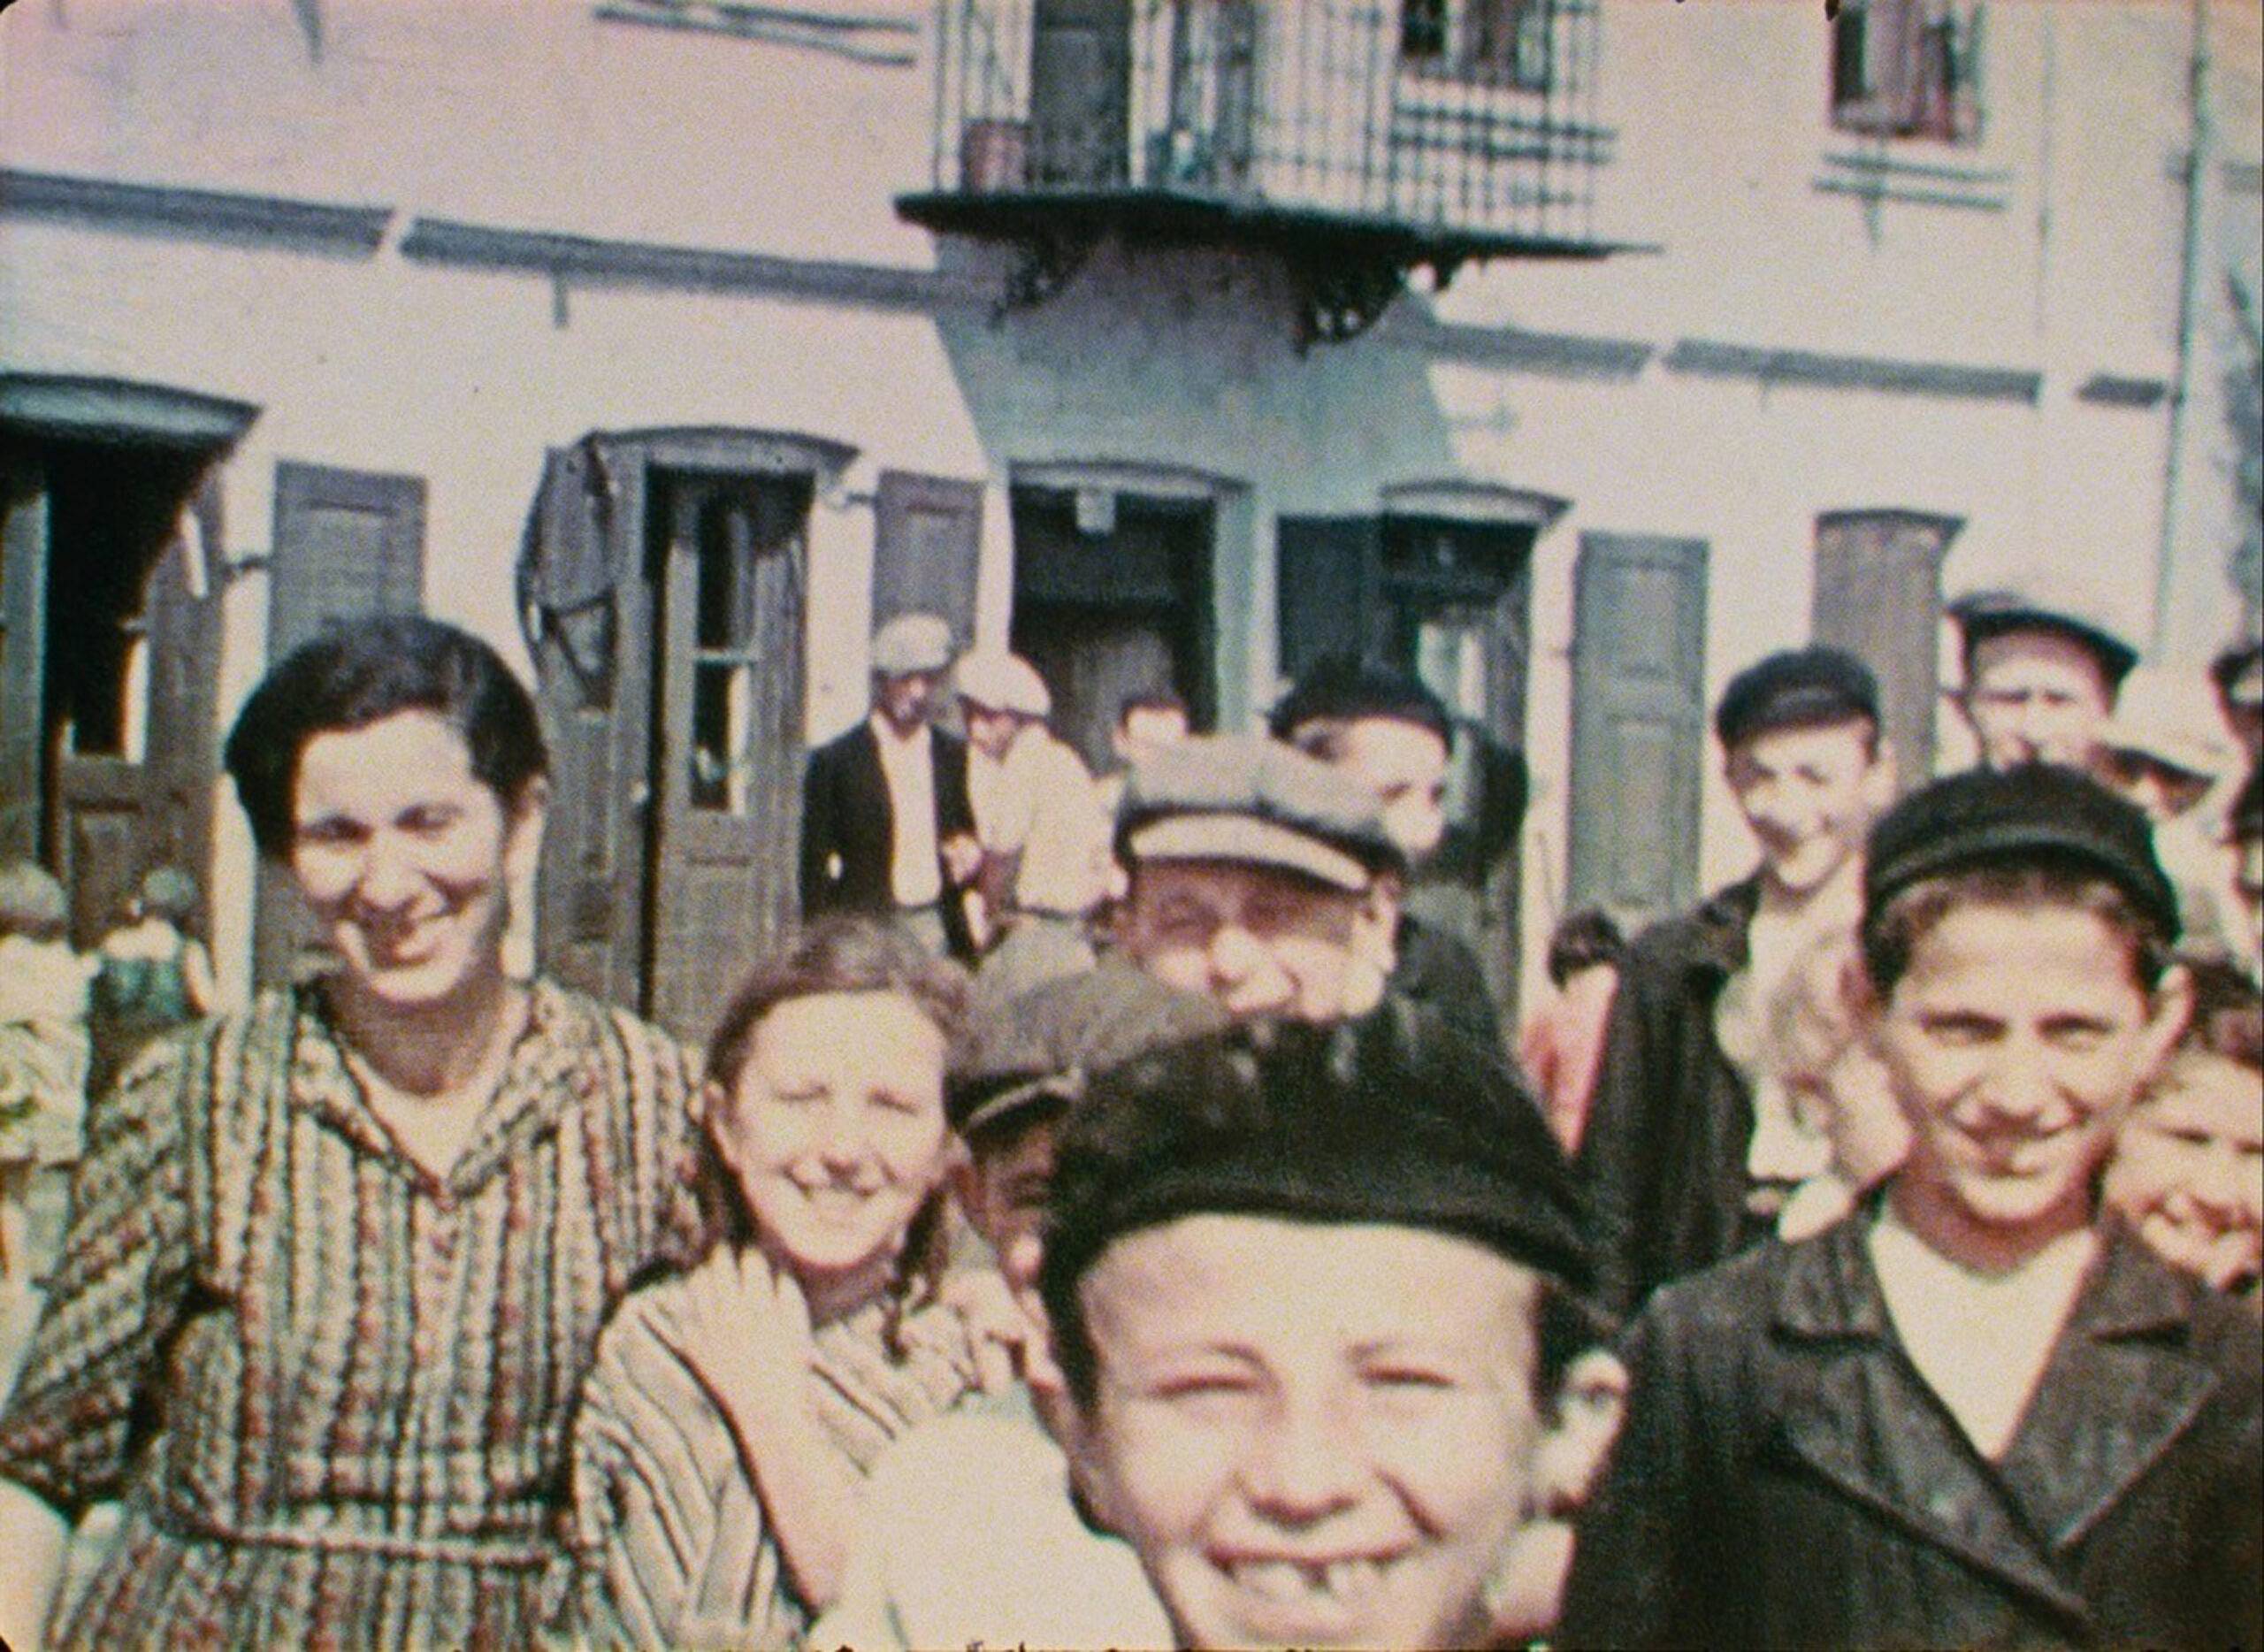 A still from "Three Minutes: A Lengthening" shows the people of Nasielsk smiling for the movie camera in 1938.